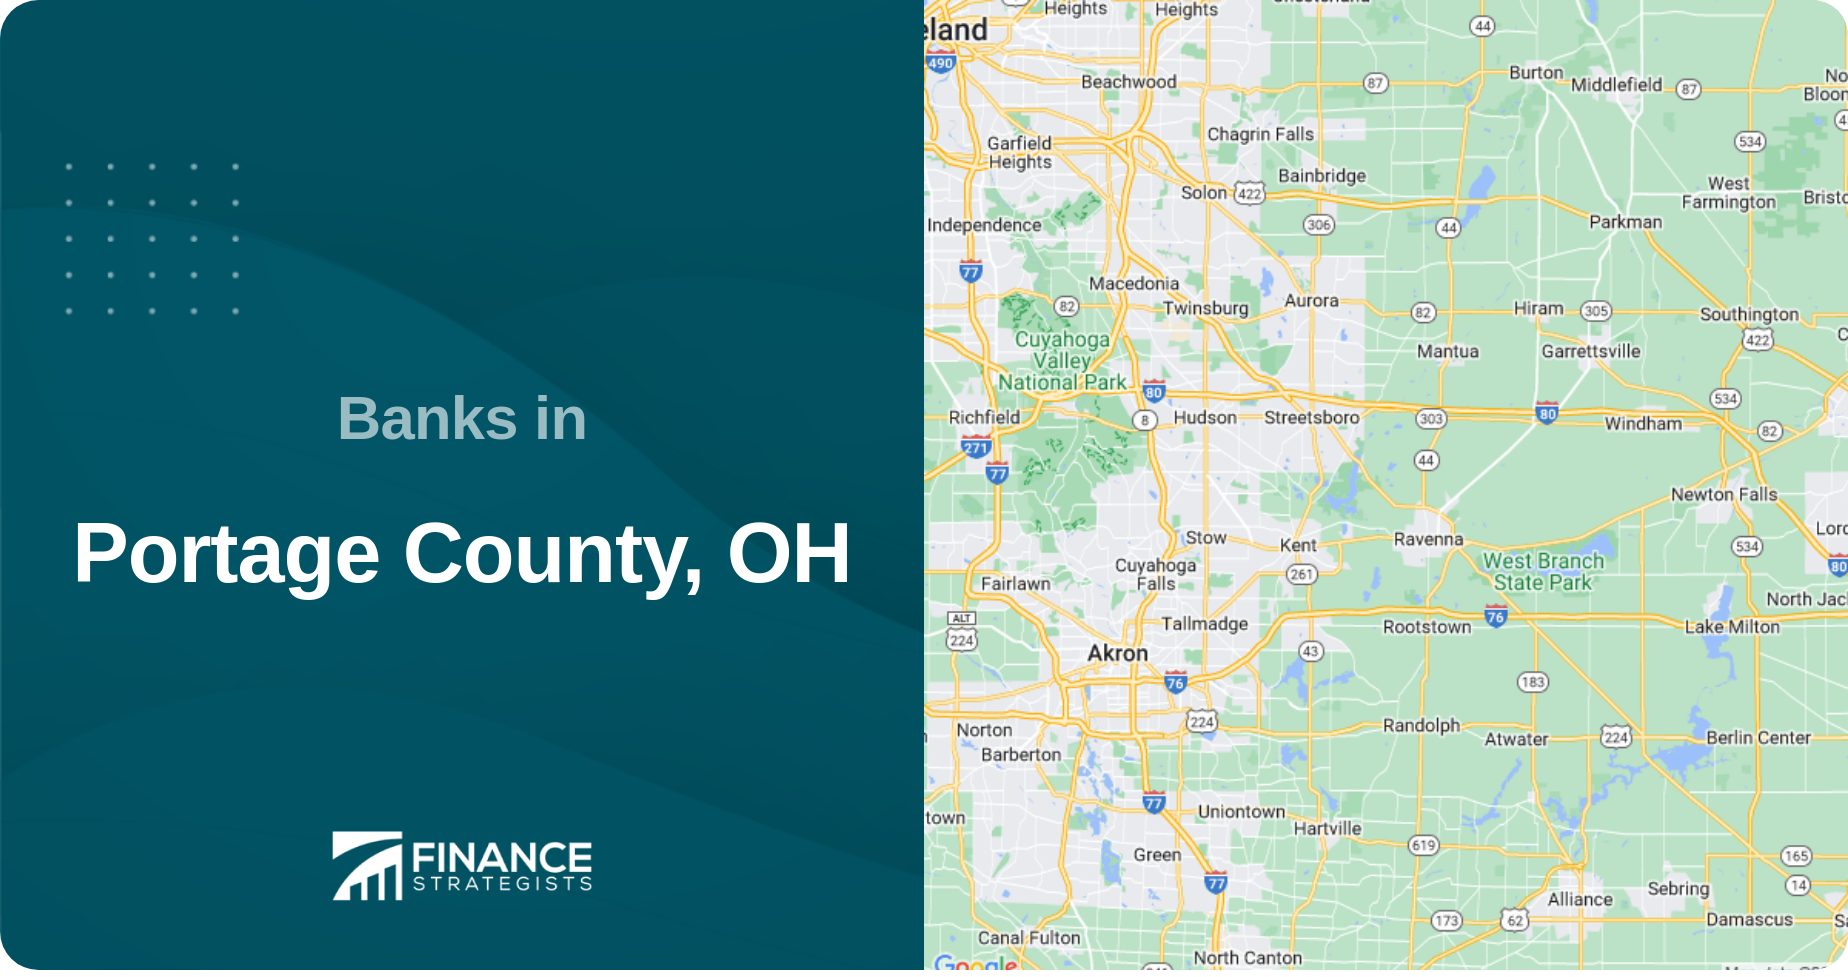 Banks in Portage County, OH